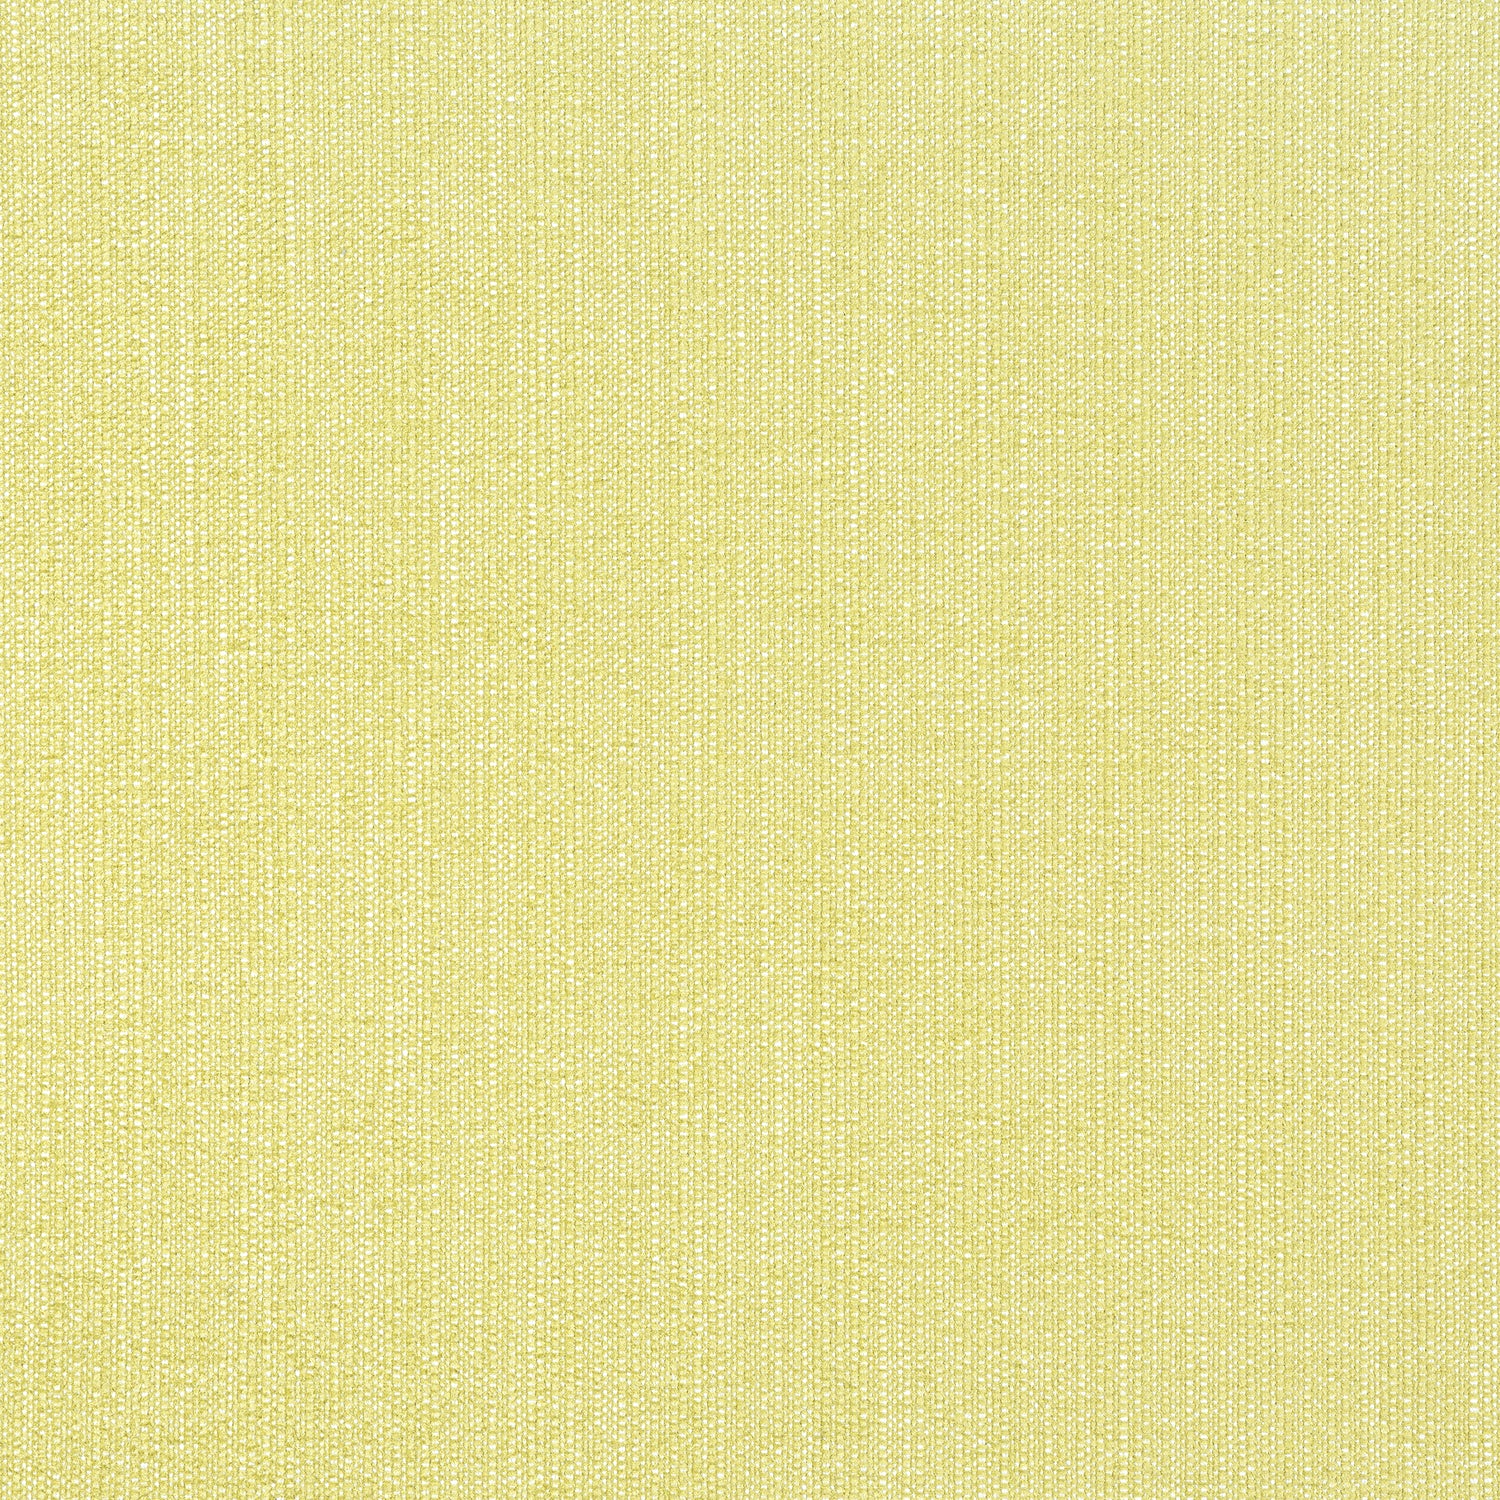 Veda fabric in lemongrass color - pattern number W8716 - by Thibaut in the Haven Textures collection